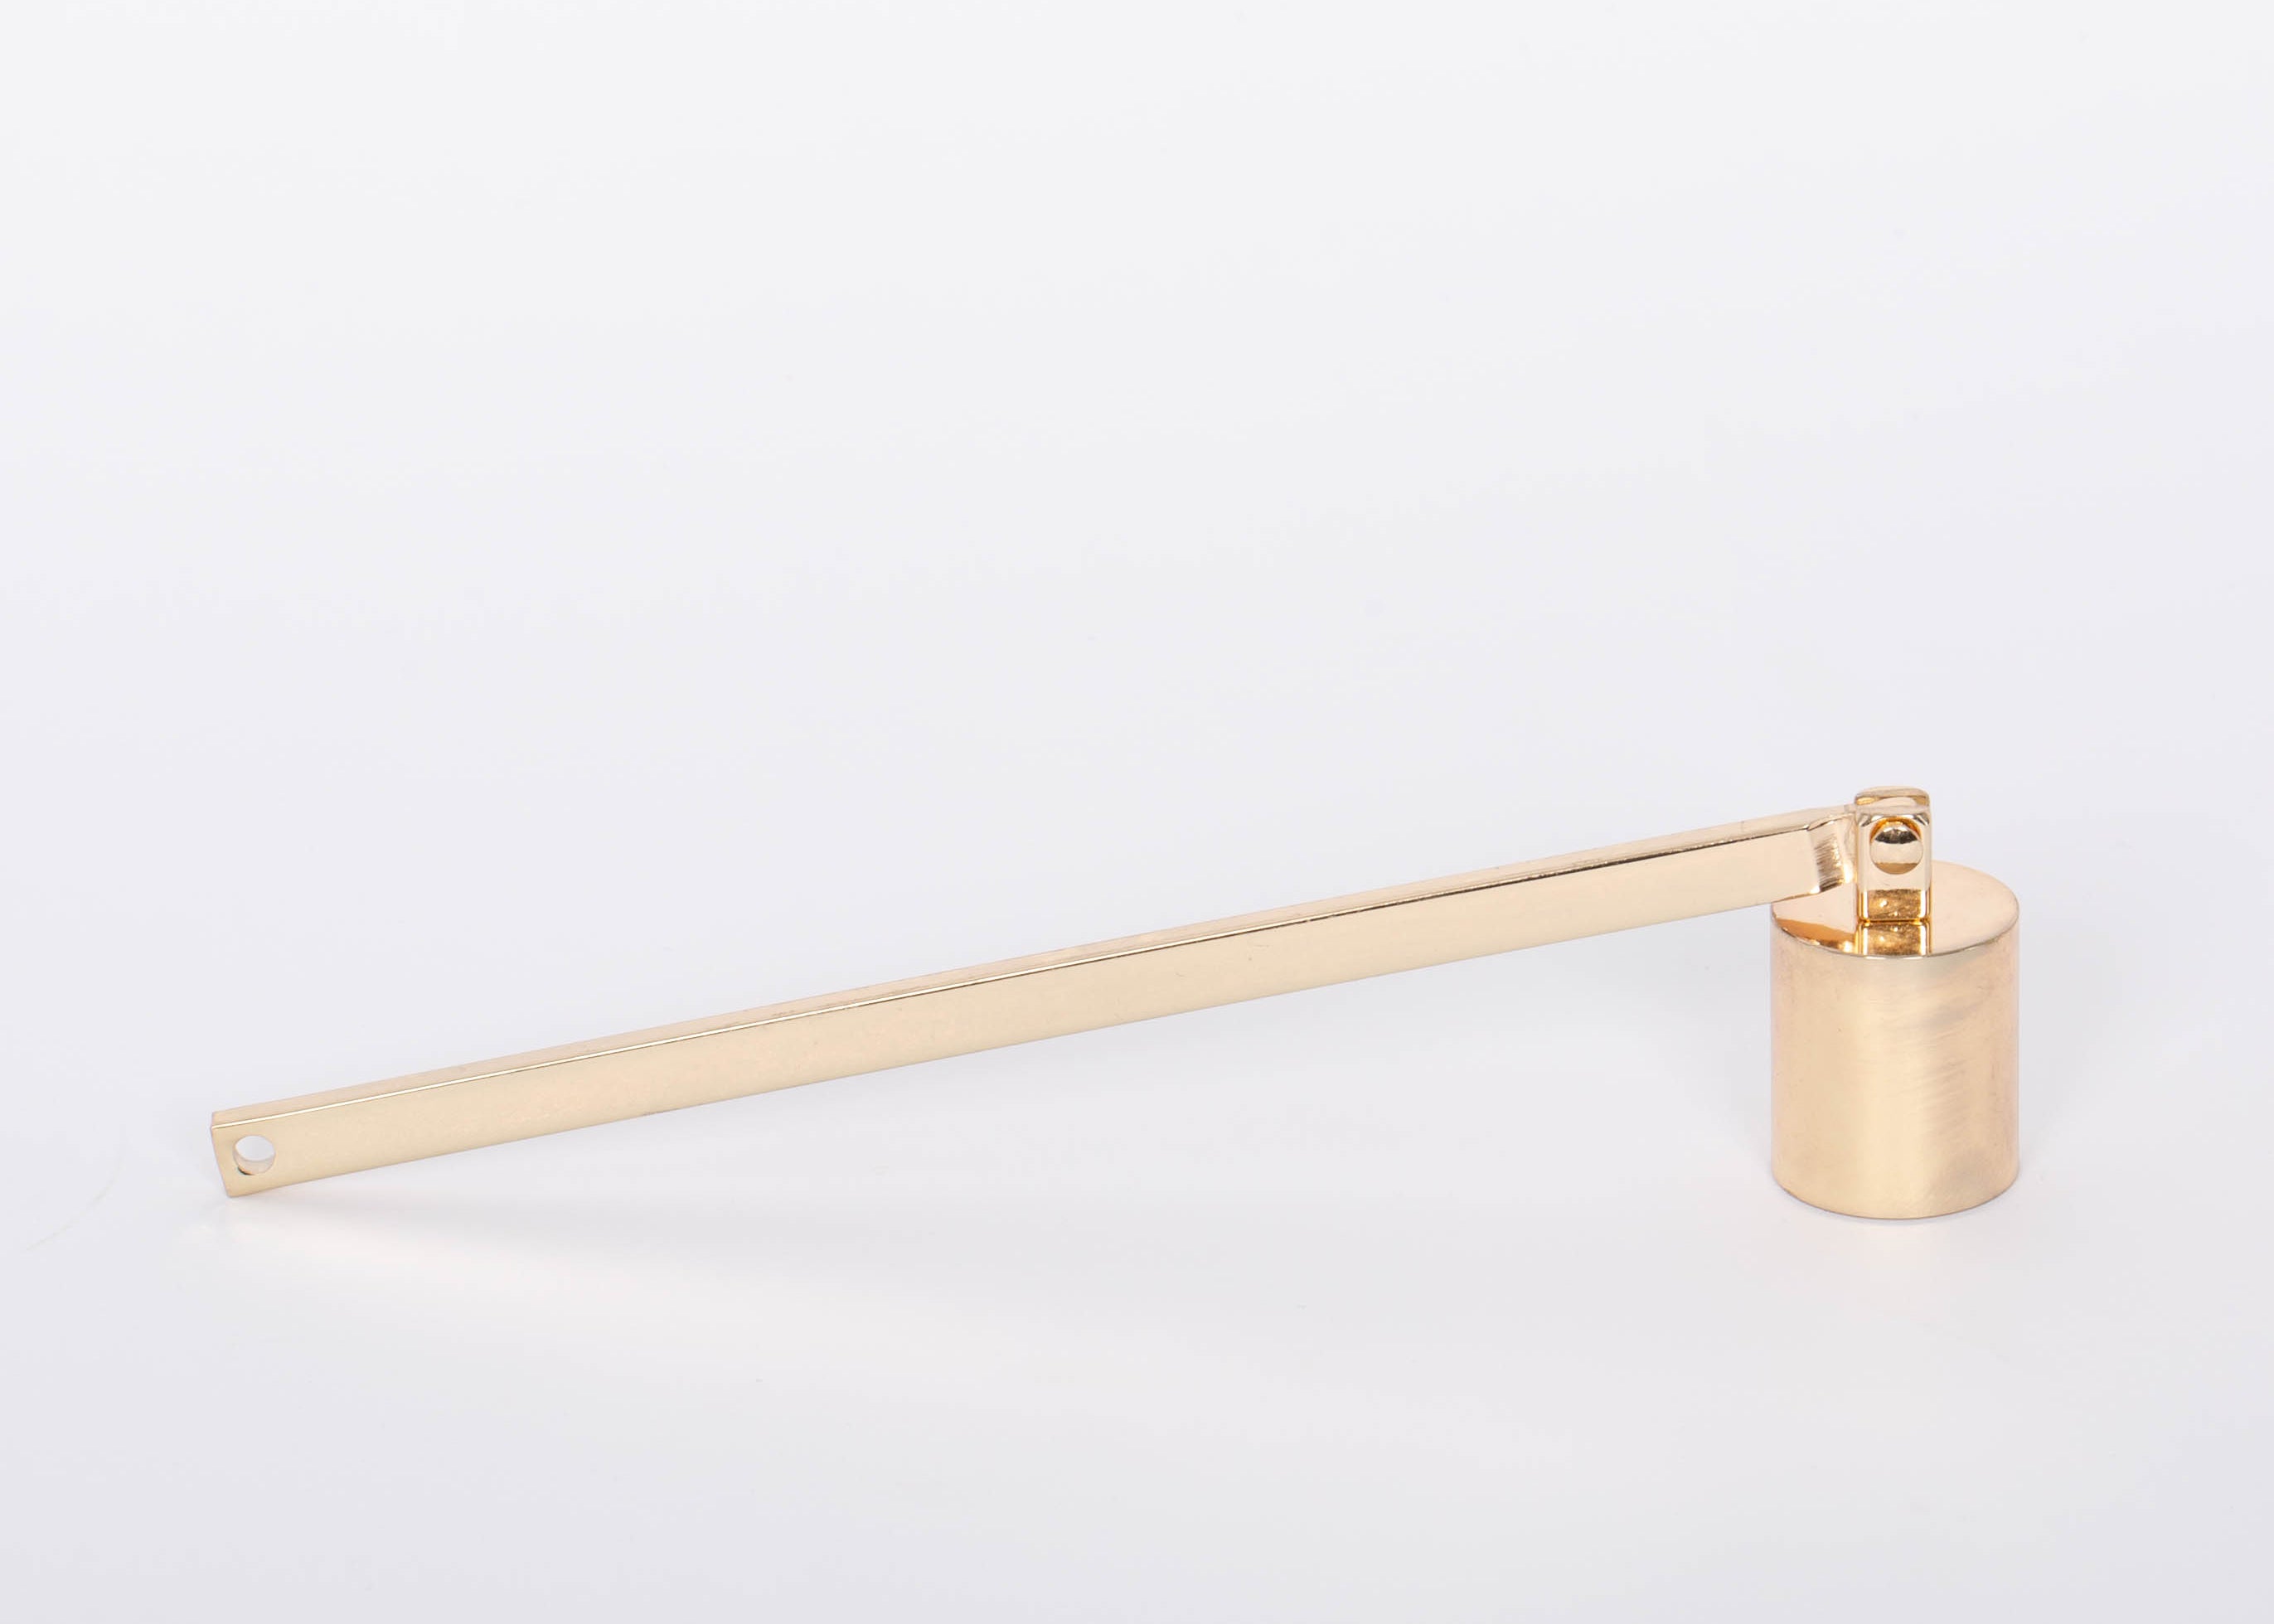 Minimal Golden Candle Snuffer by Designworks. White background.